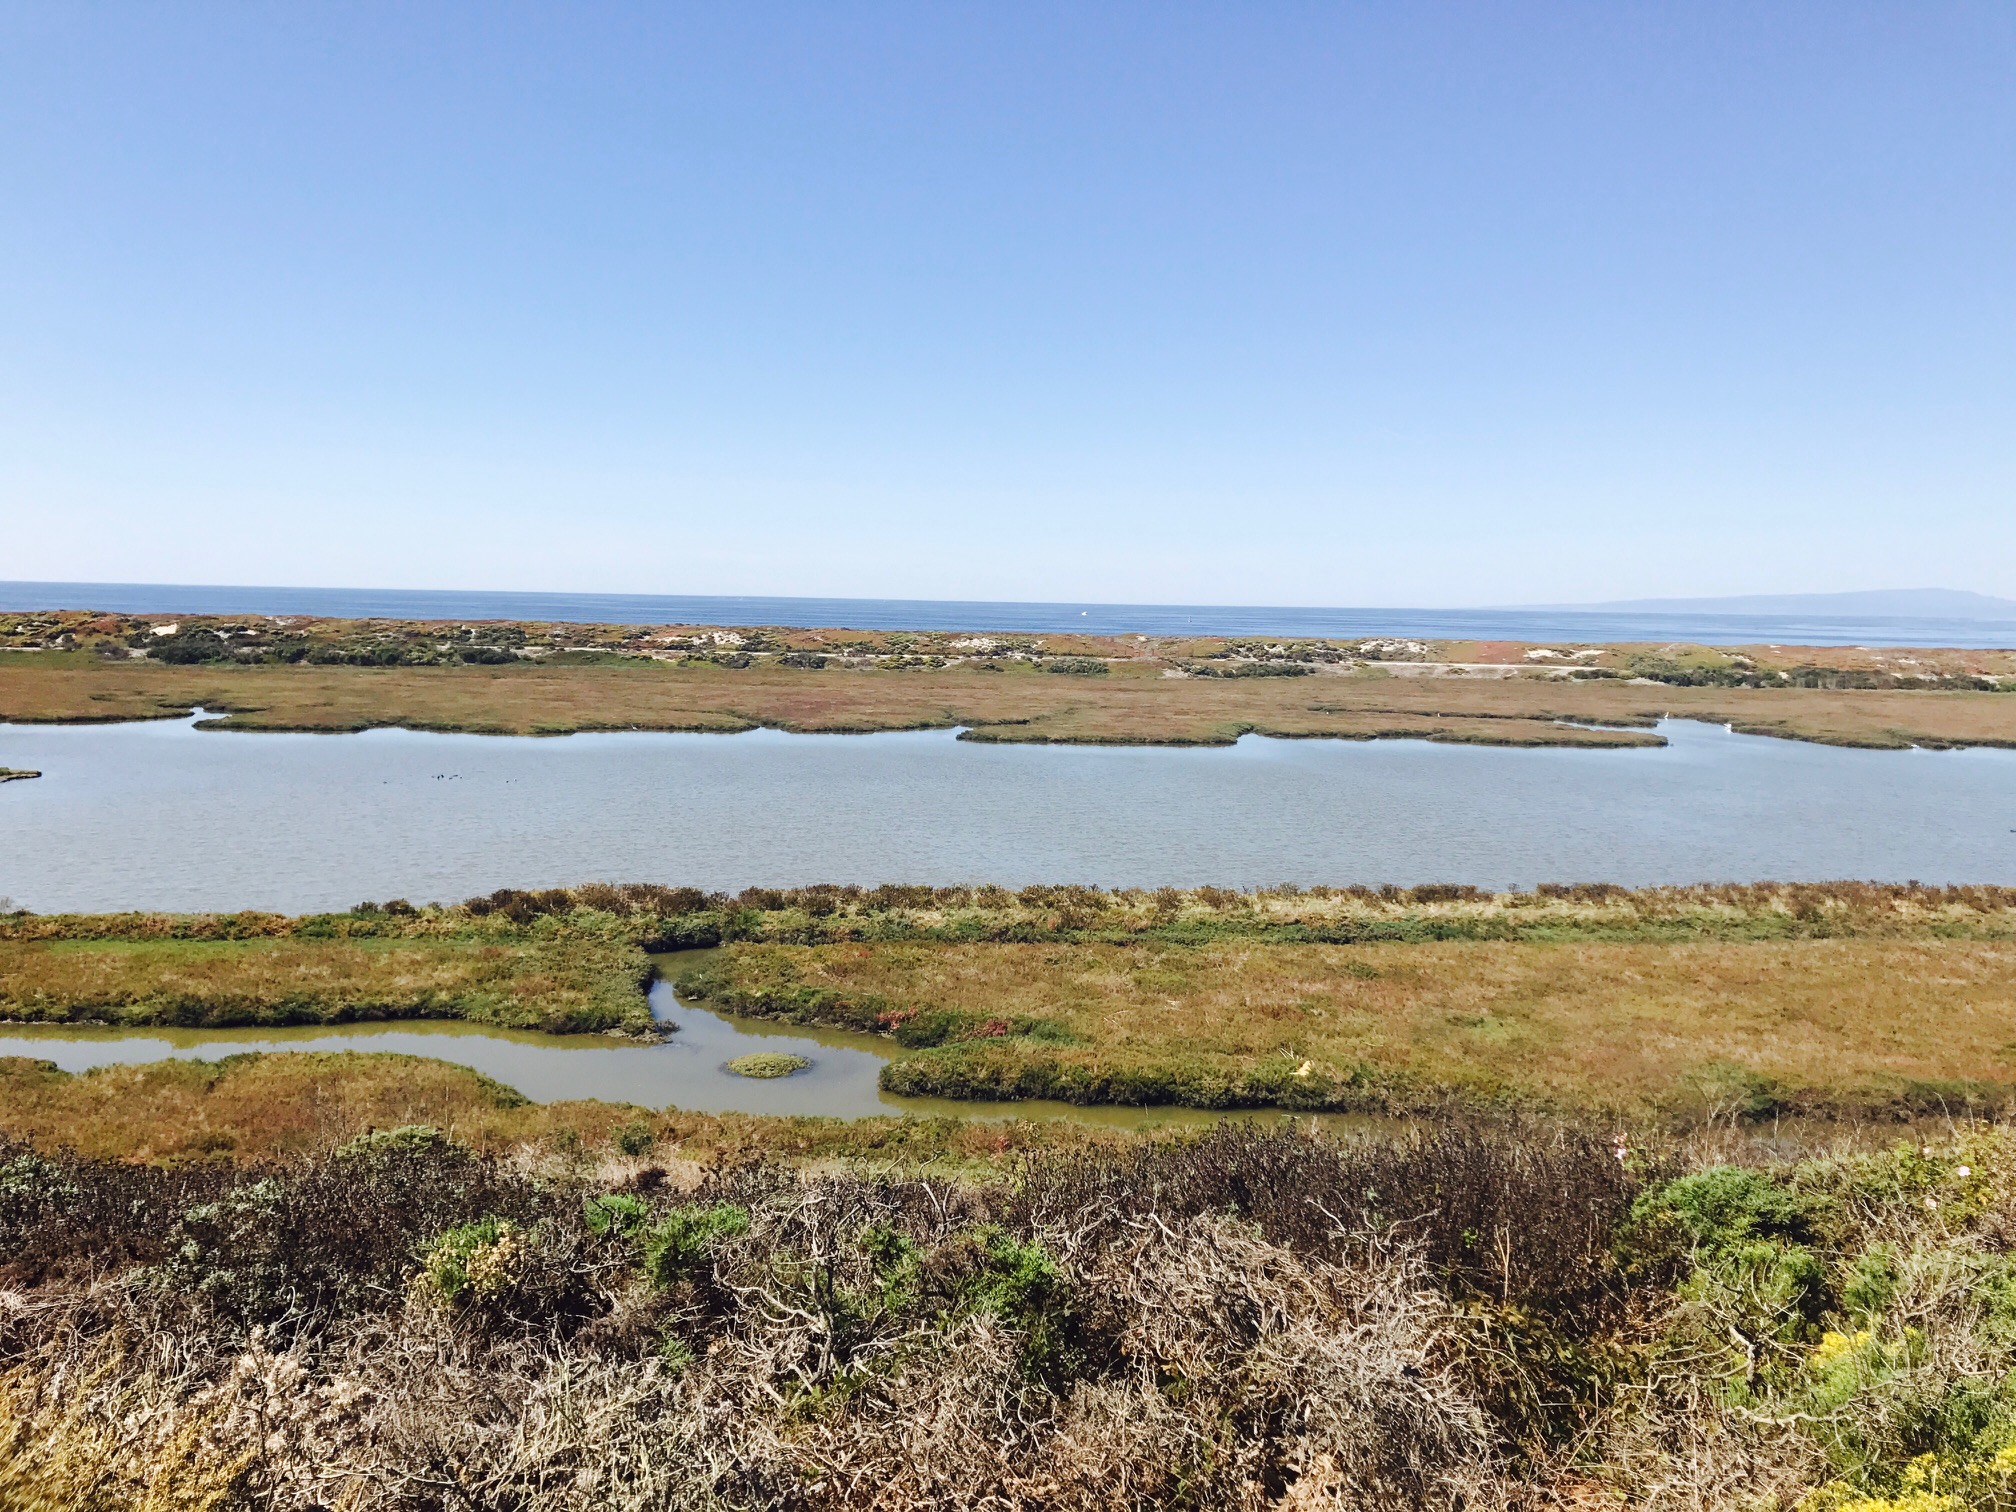 TNC’s Coastal Resilience featured at the Monterey County Coastal Resilience Workshop